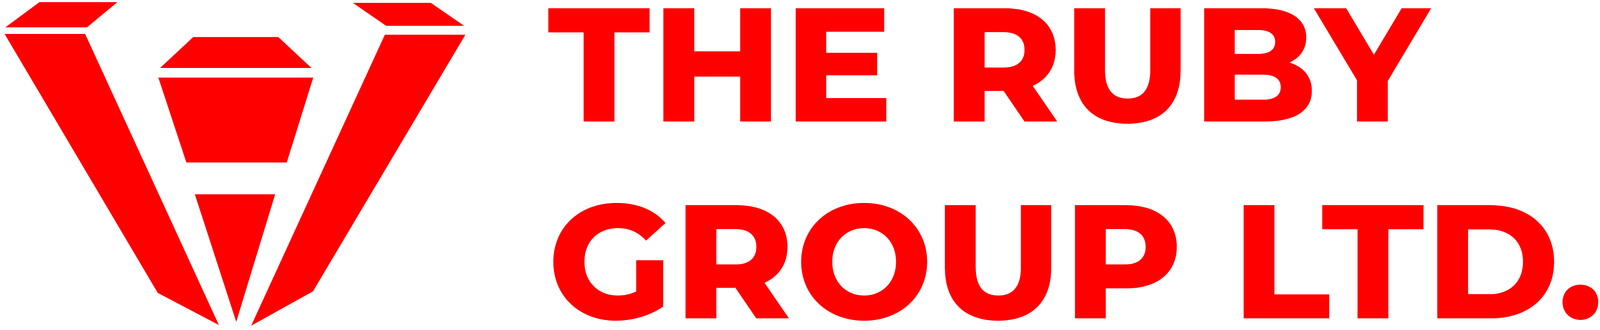 The Ruby Group Contractors